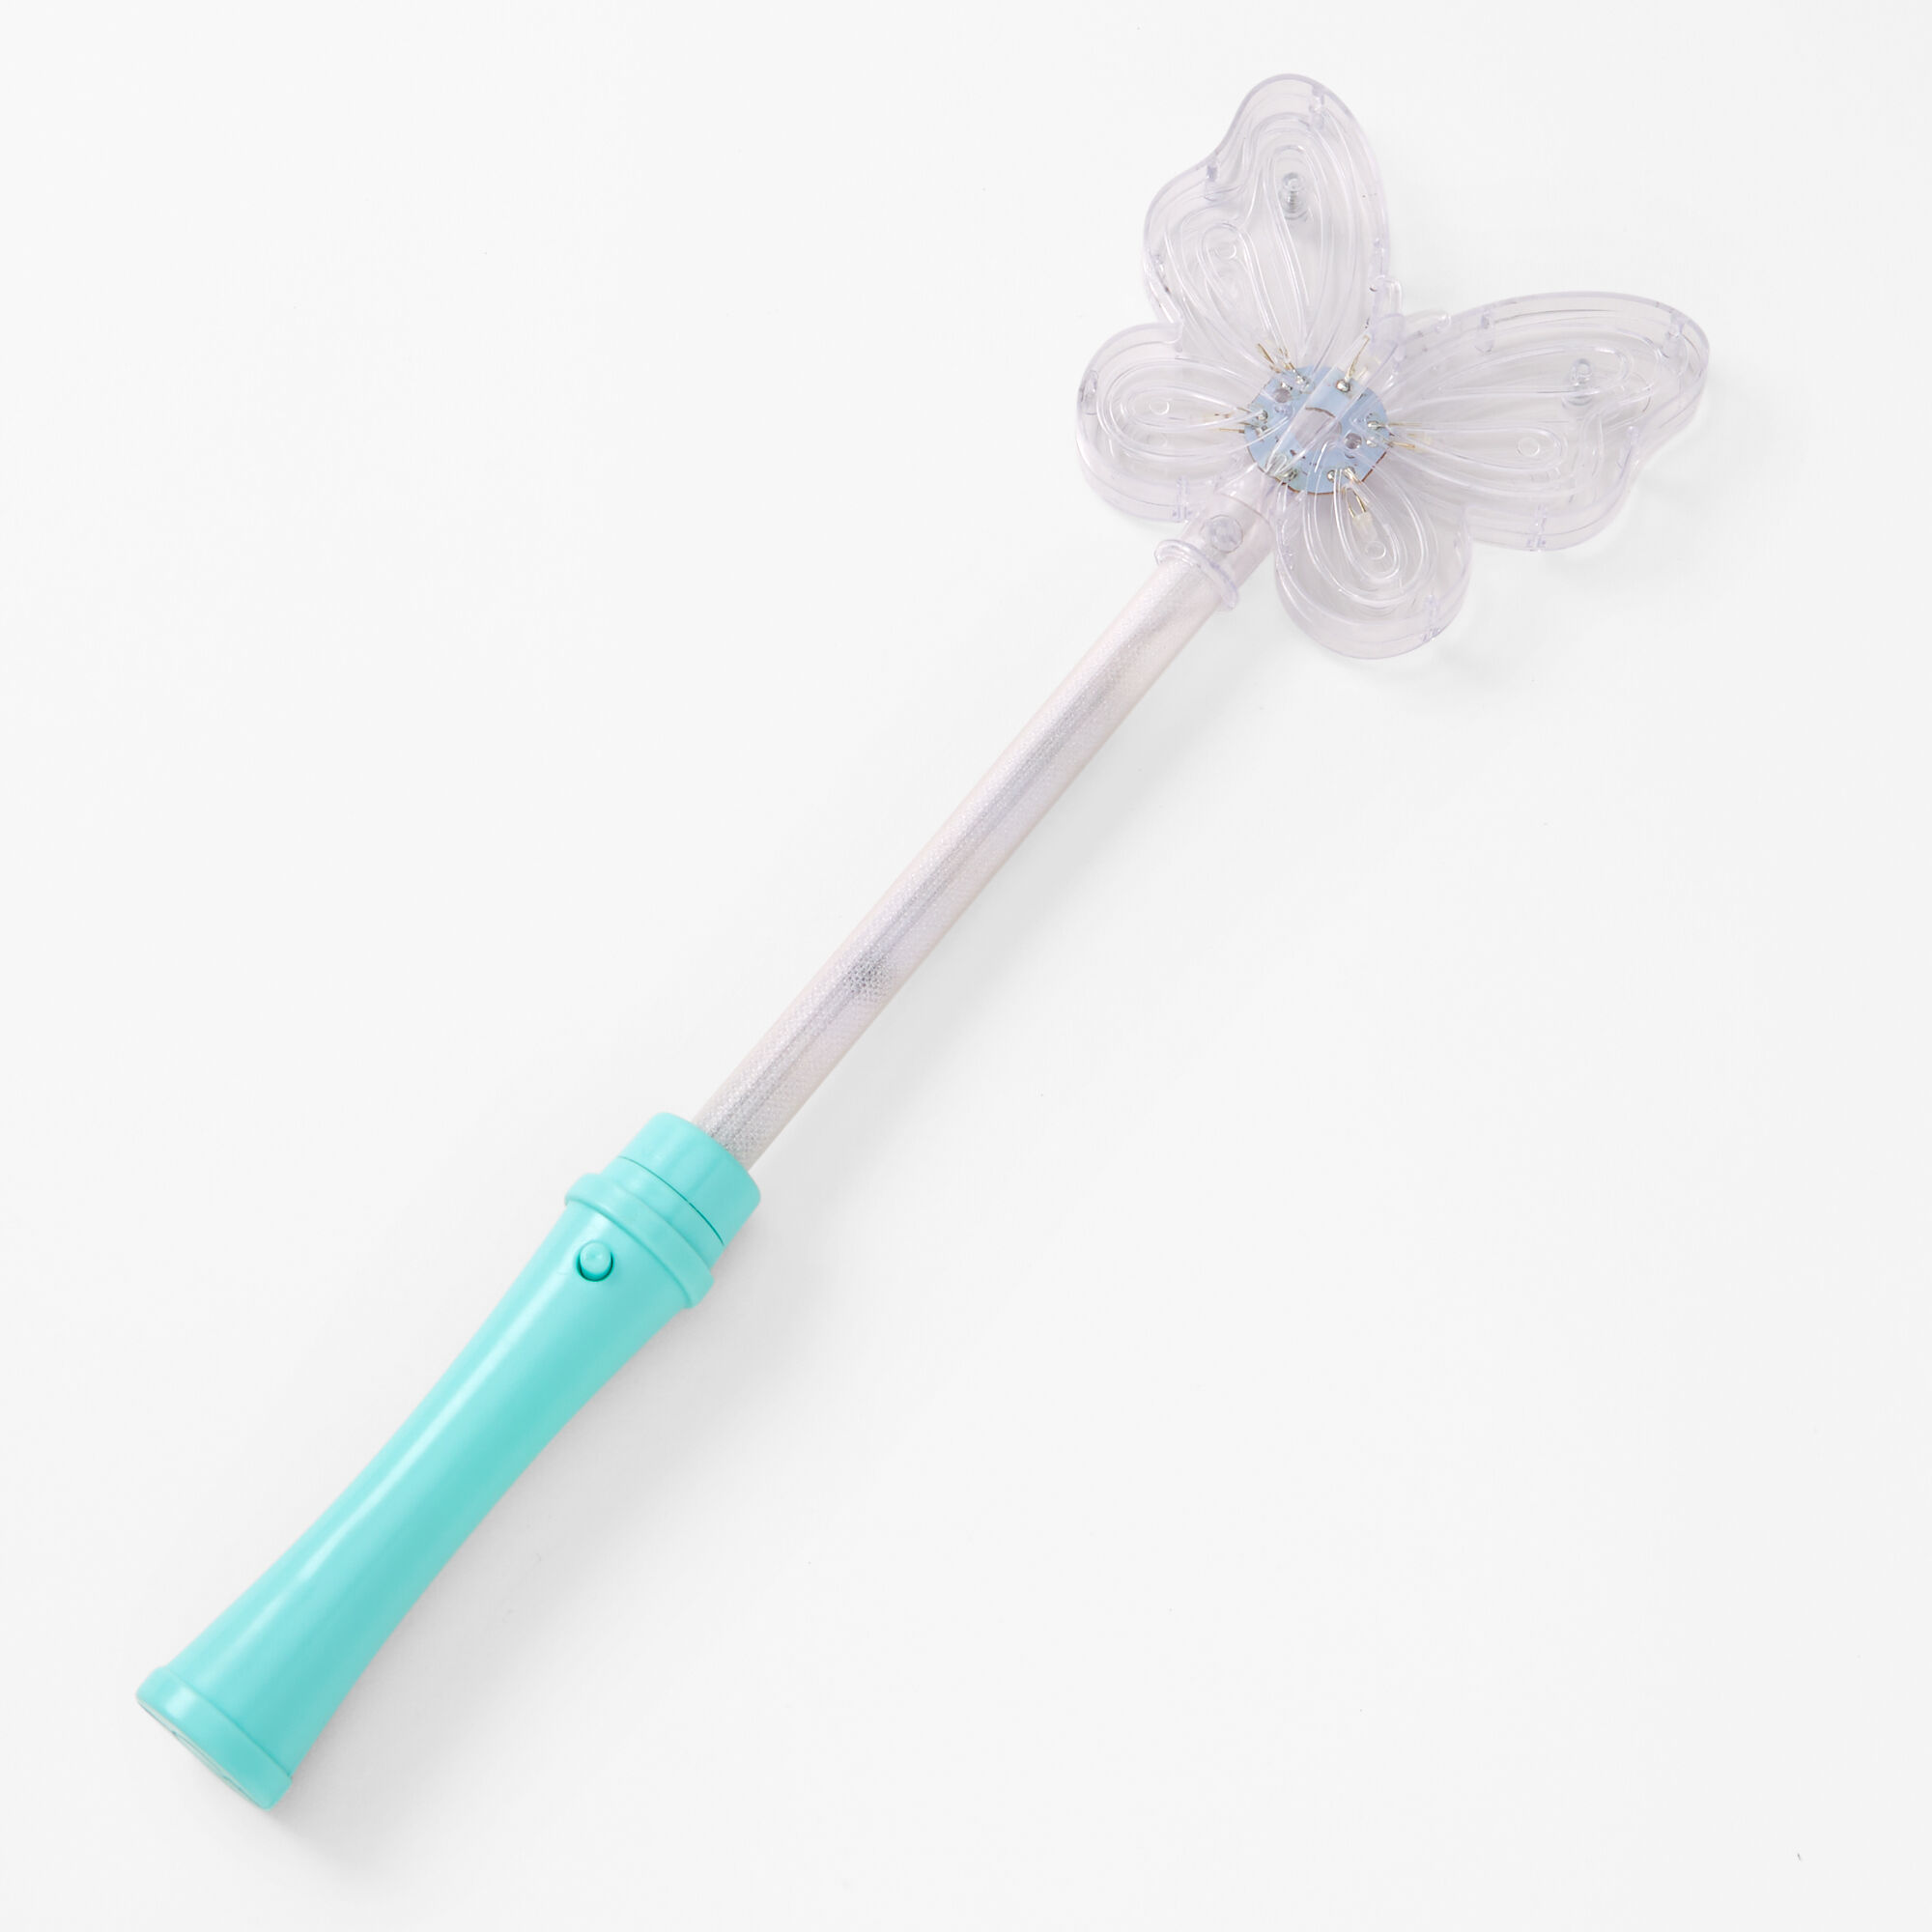 View Claires Club LightUp Butterfly Wand information